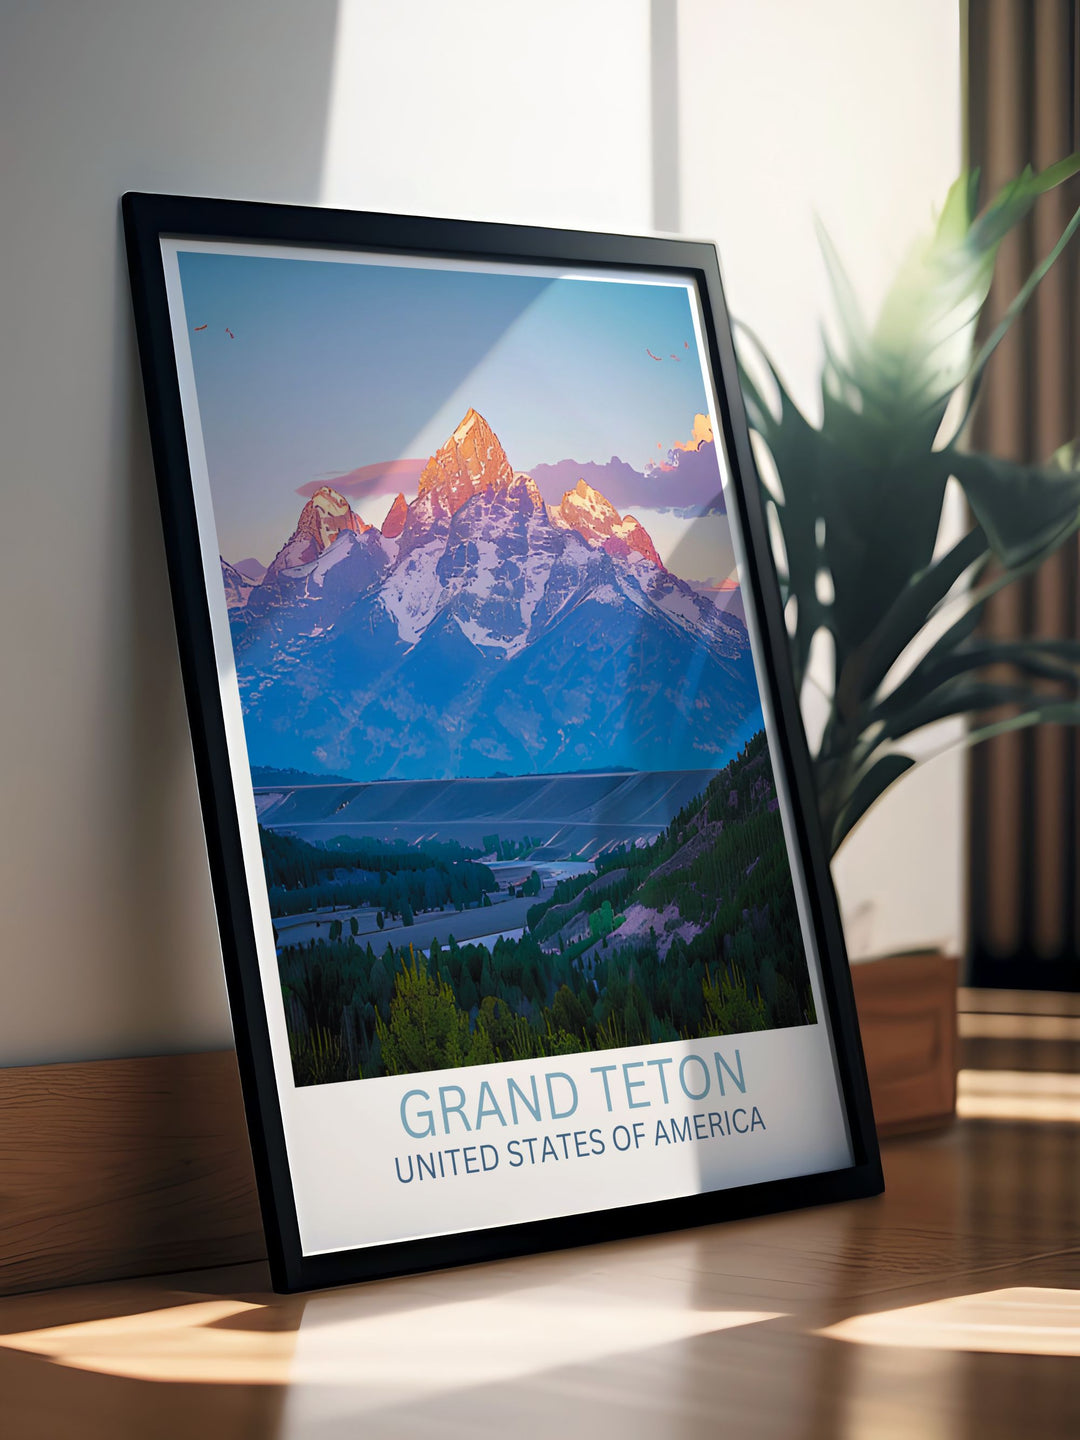 Grand Teton Peak under a starry sky, night photography turned into high quality wall art, showcasing the undisturbed natural beauty and celestial wonders.